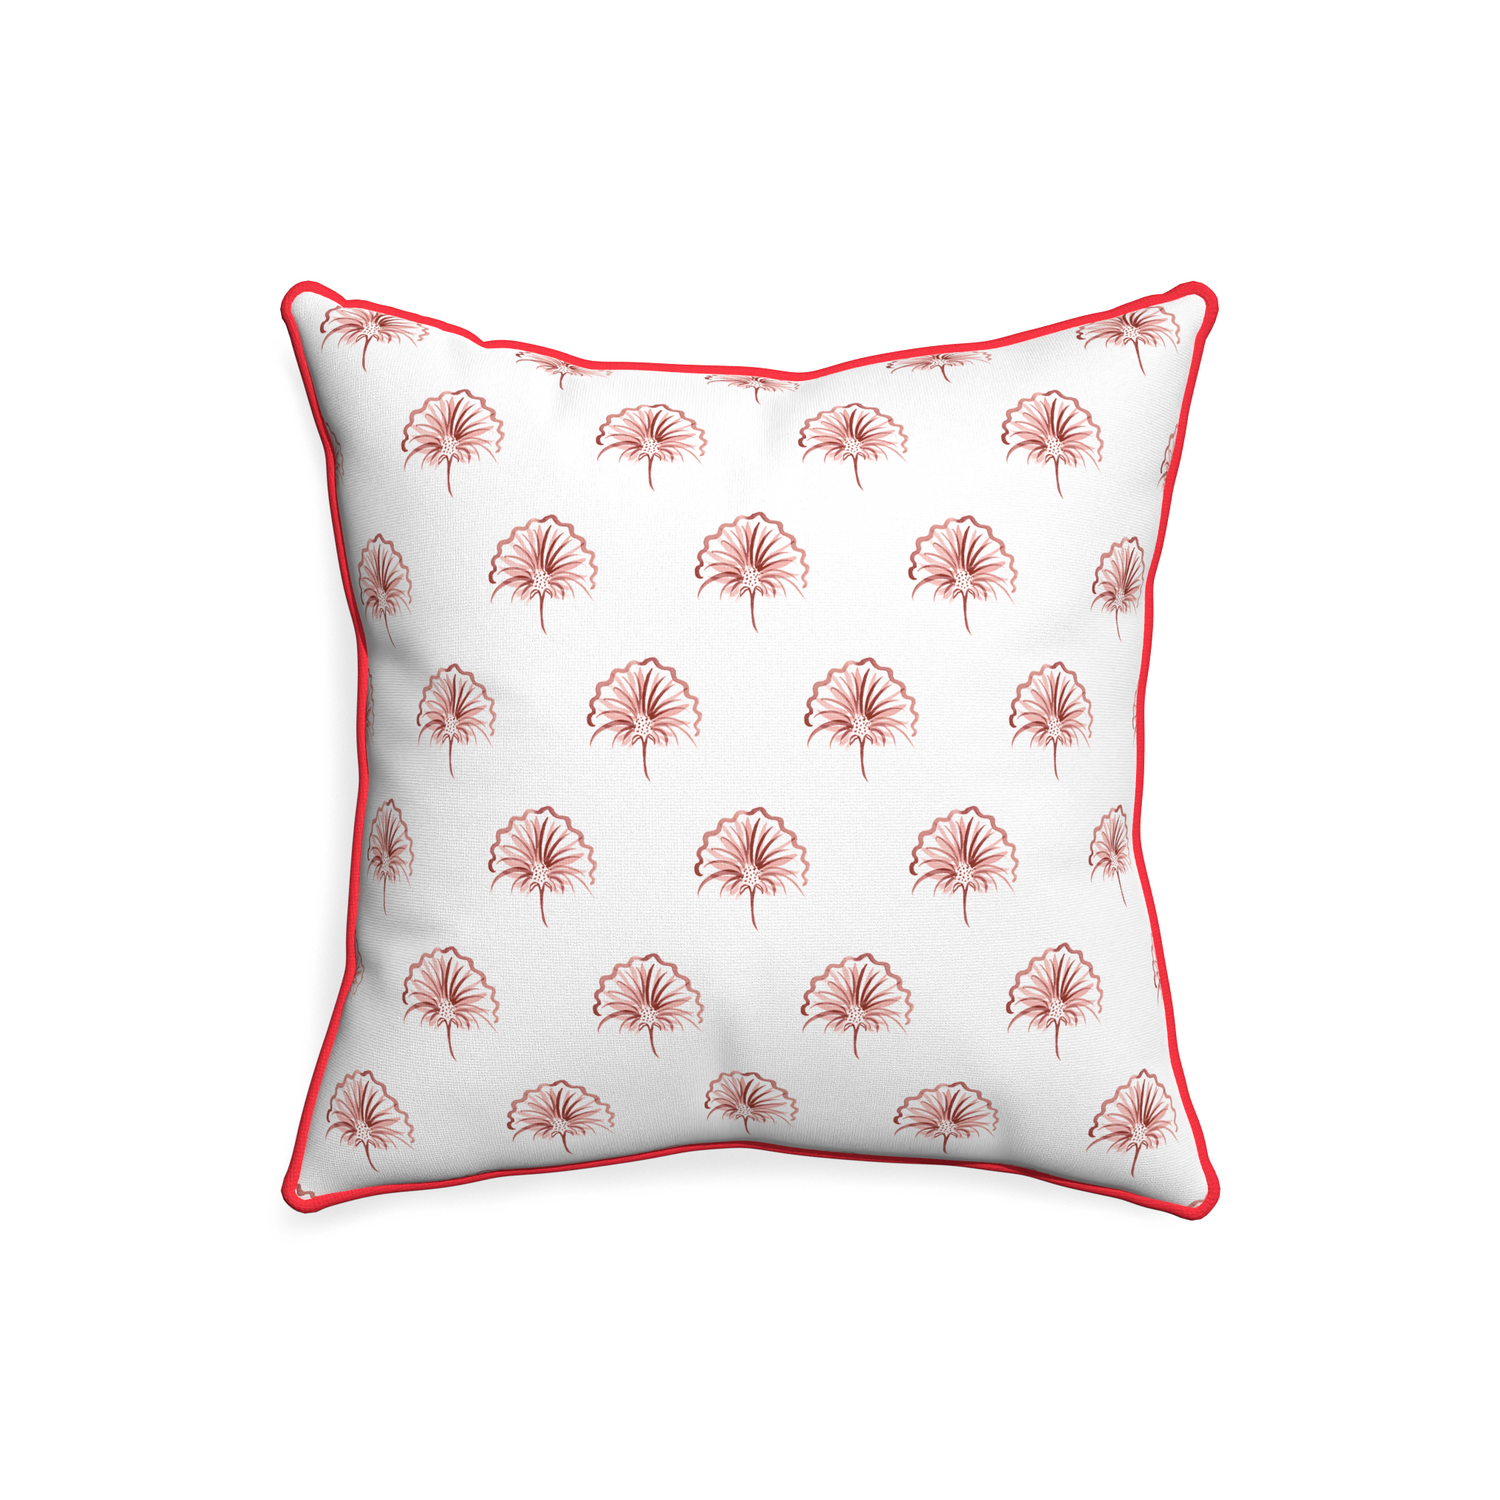 20-square penelope rose custom floral pinkpillow with cherry piping on white background